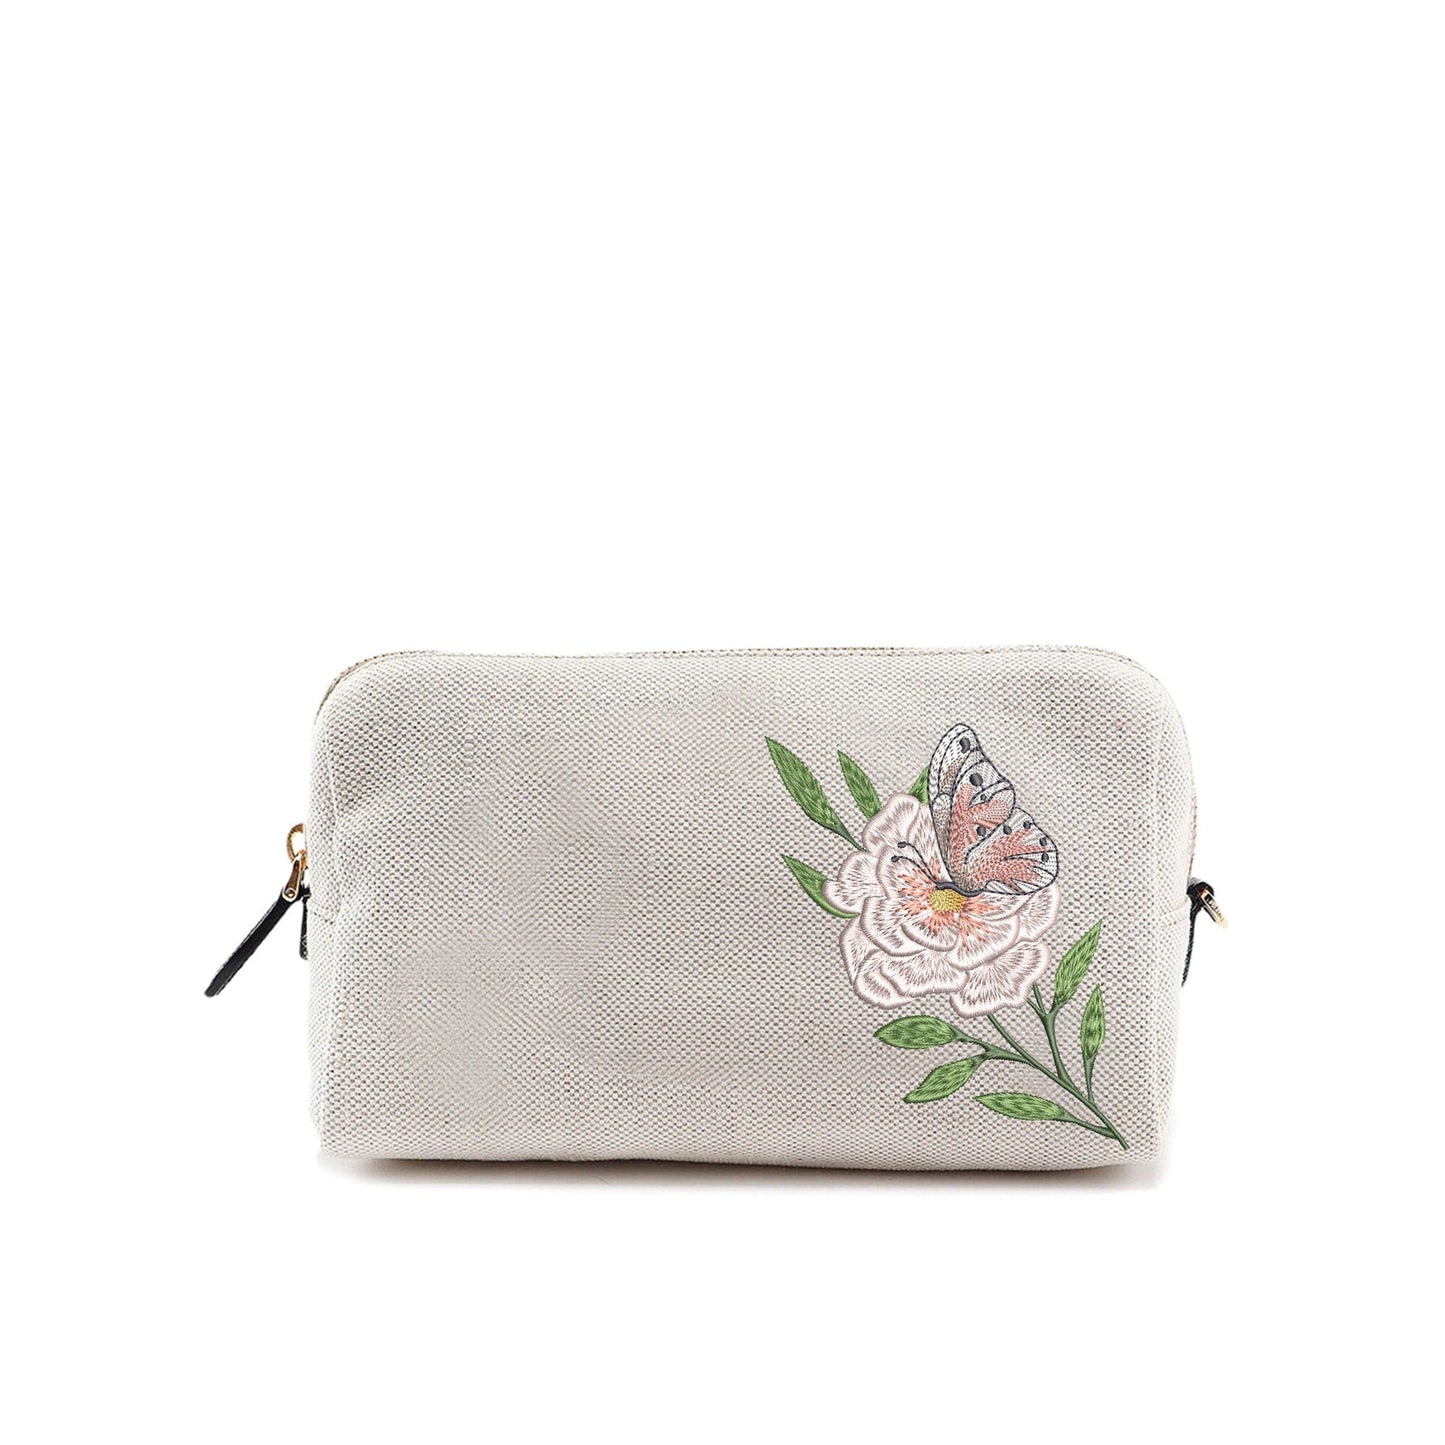 Peony Flower Butterfly Machine Embroidery Design on feminine pouch